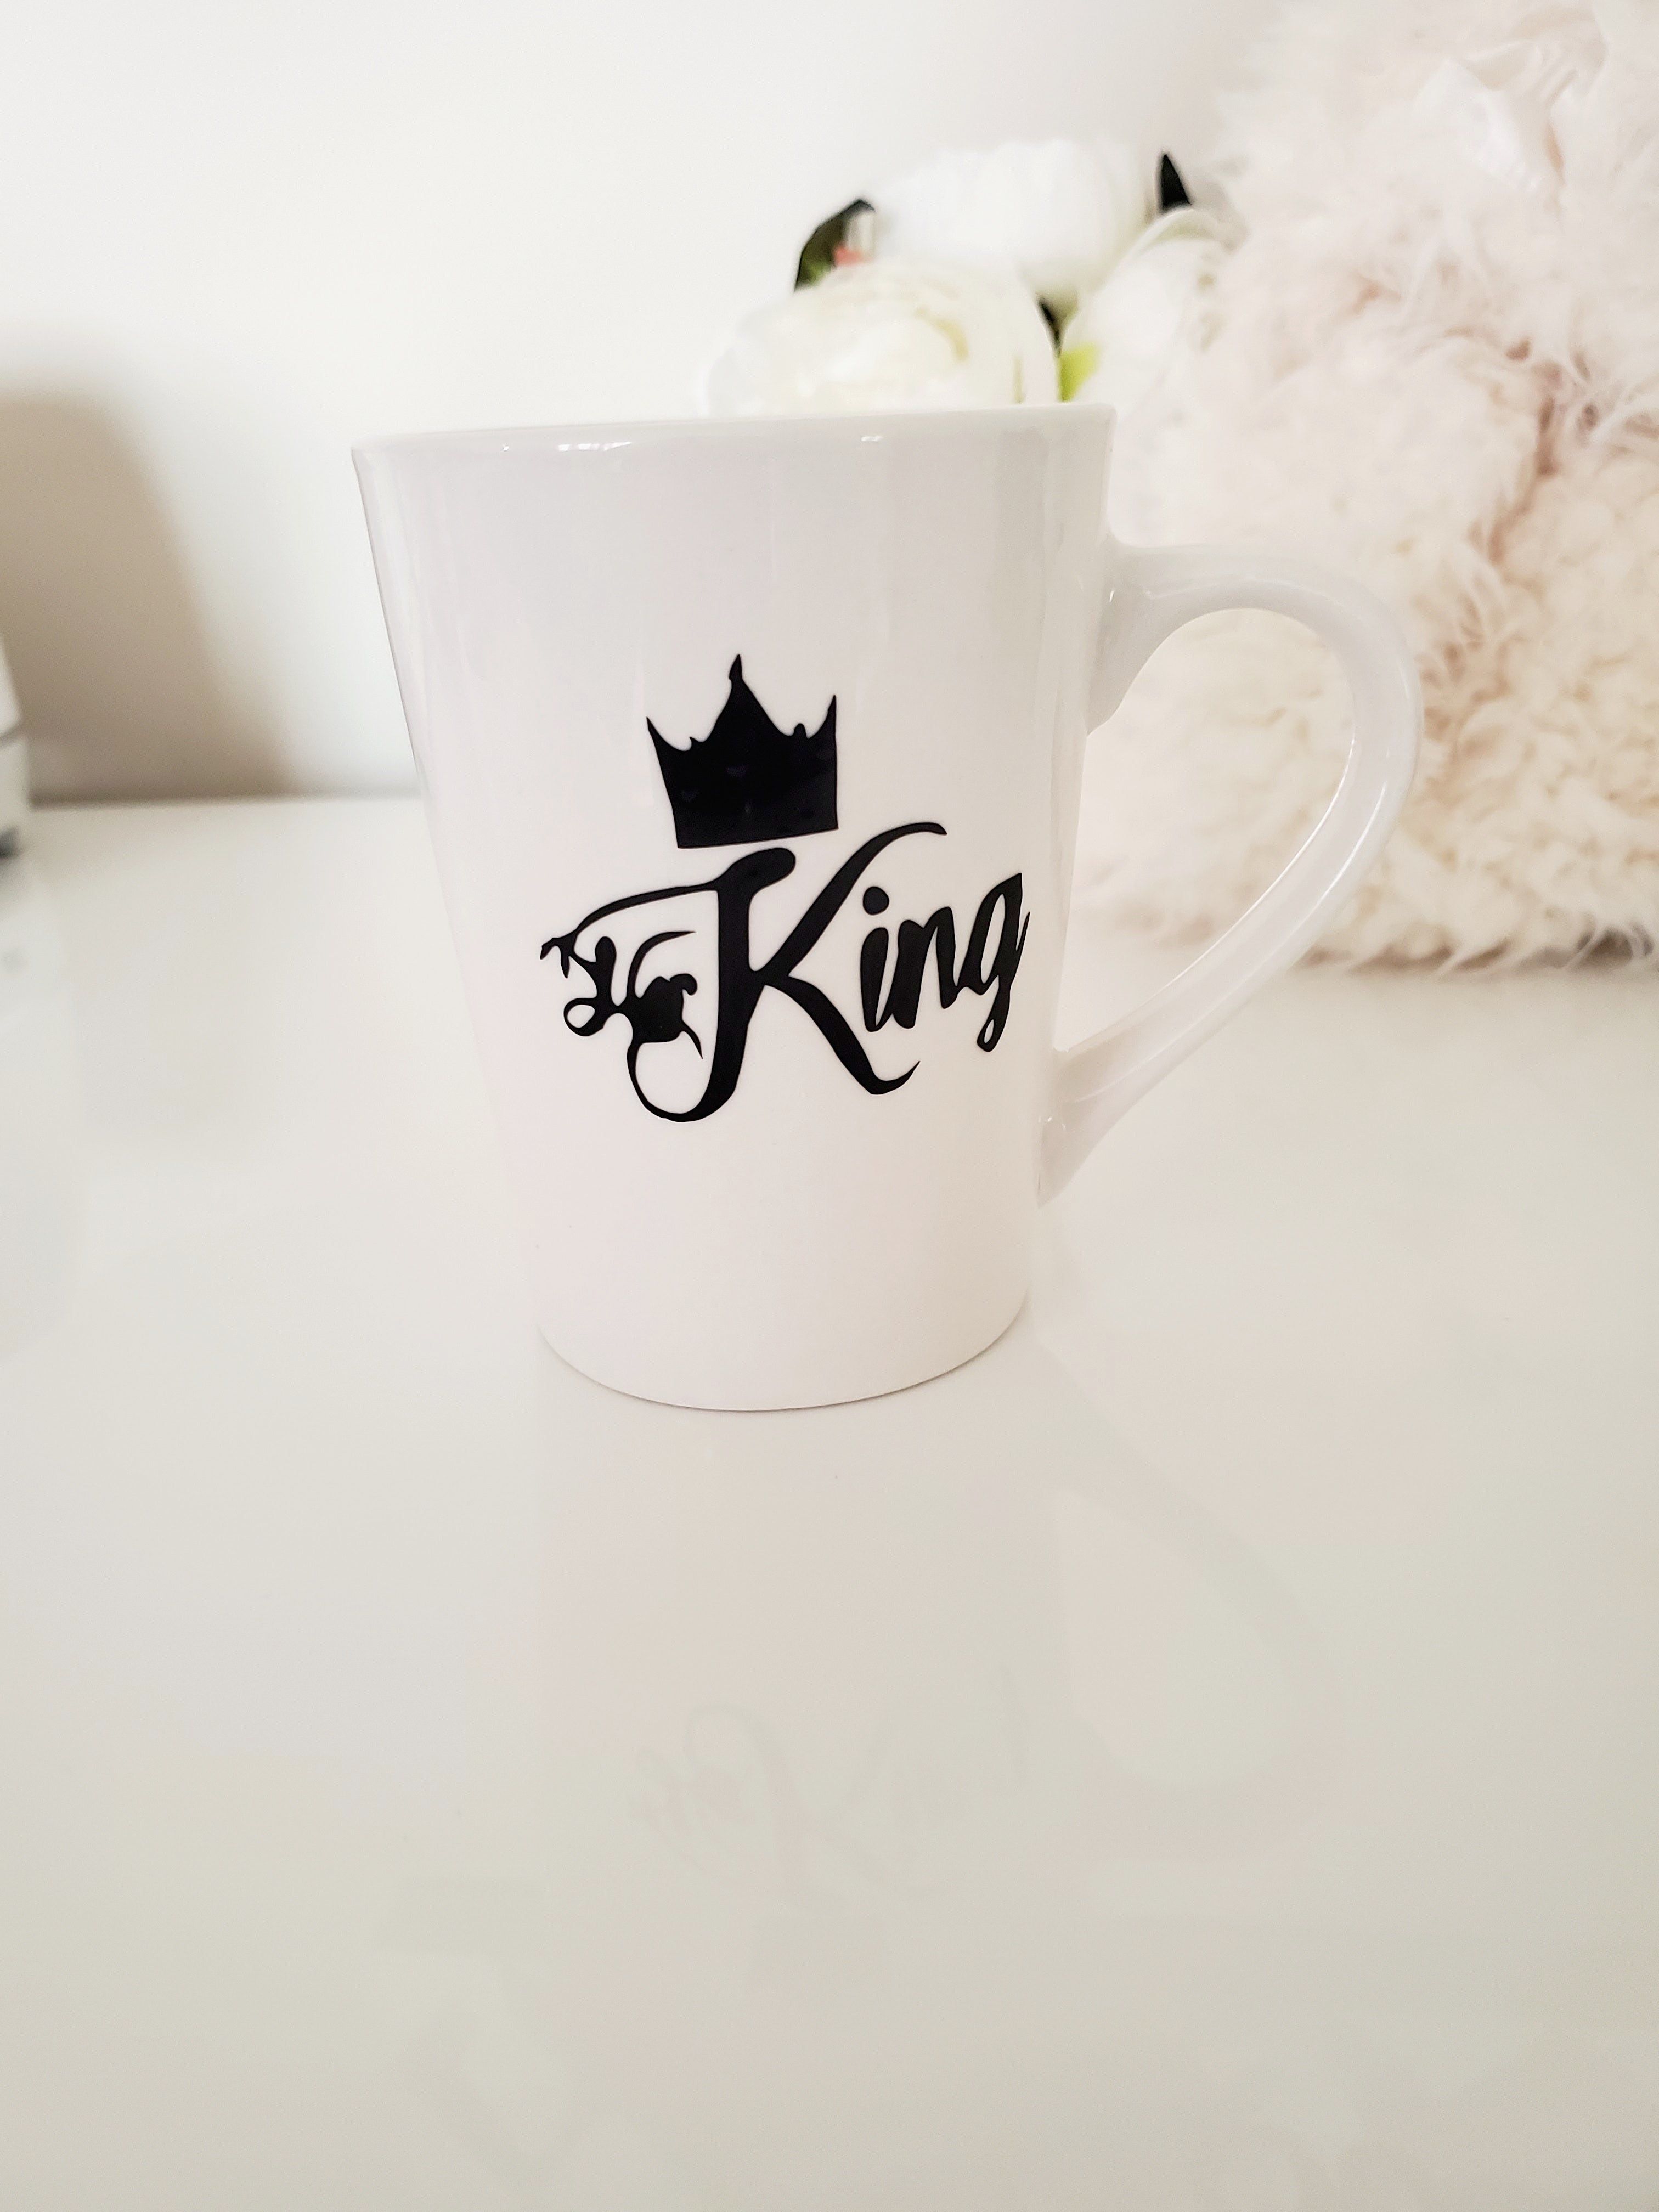 King and Queen personalized cups - white